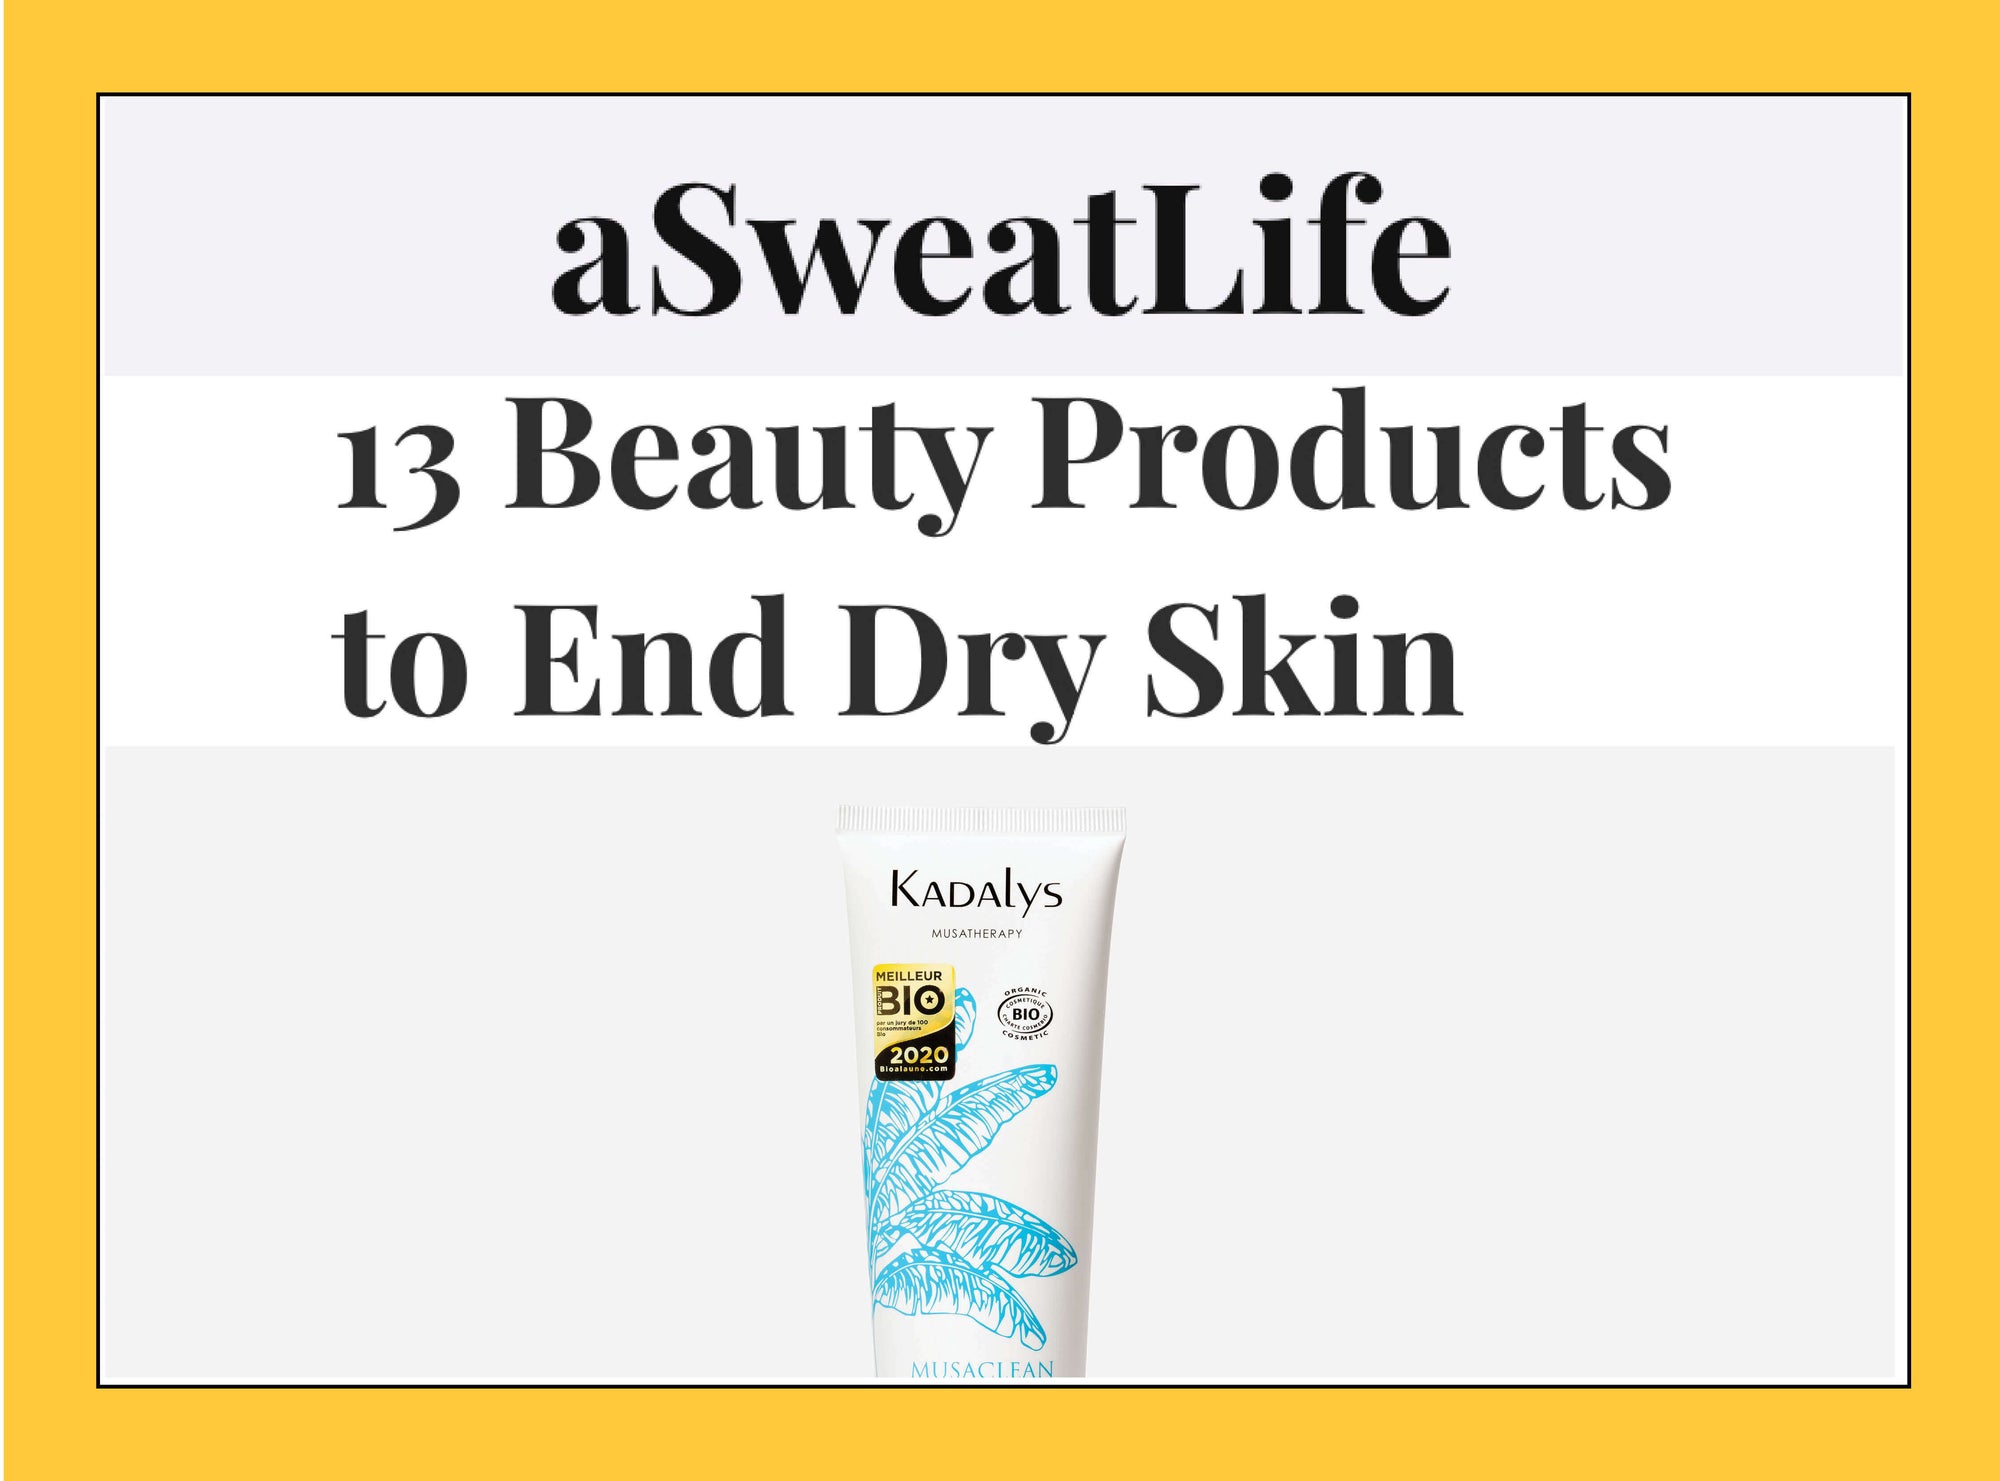 A Sweat Life names Kadalys as one of 13 beauty products to end dry skin.